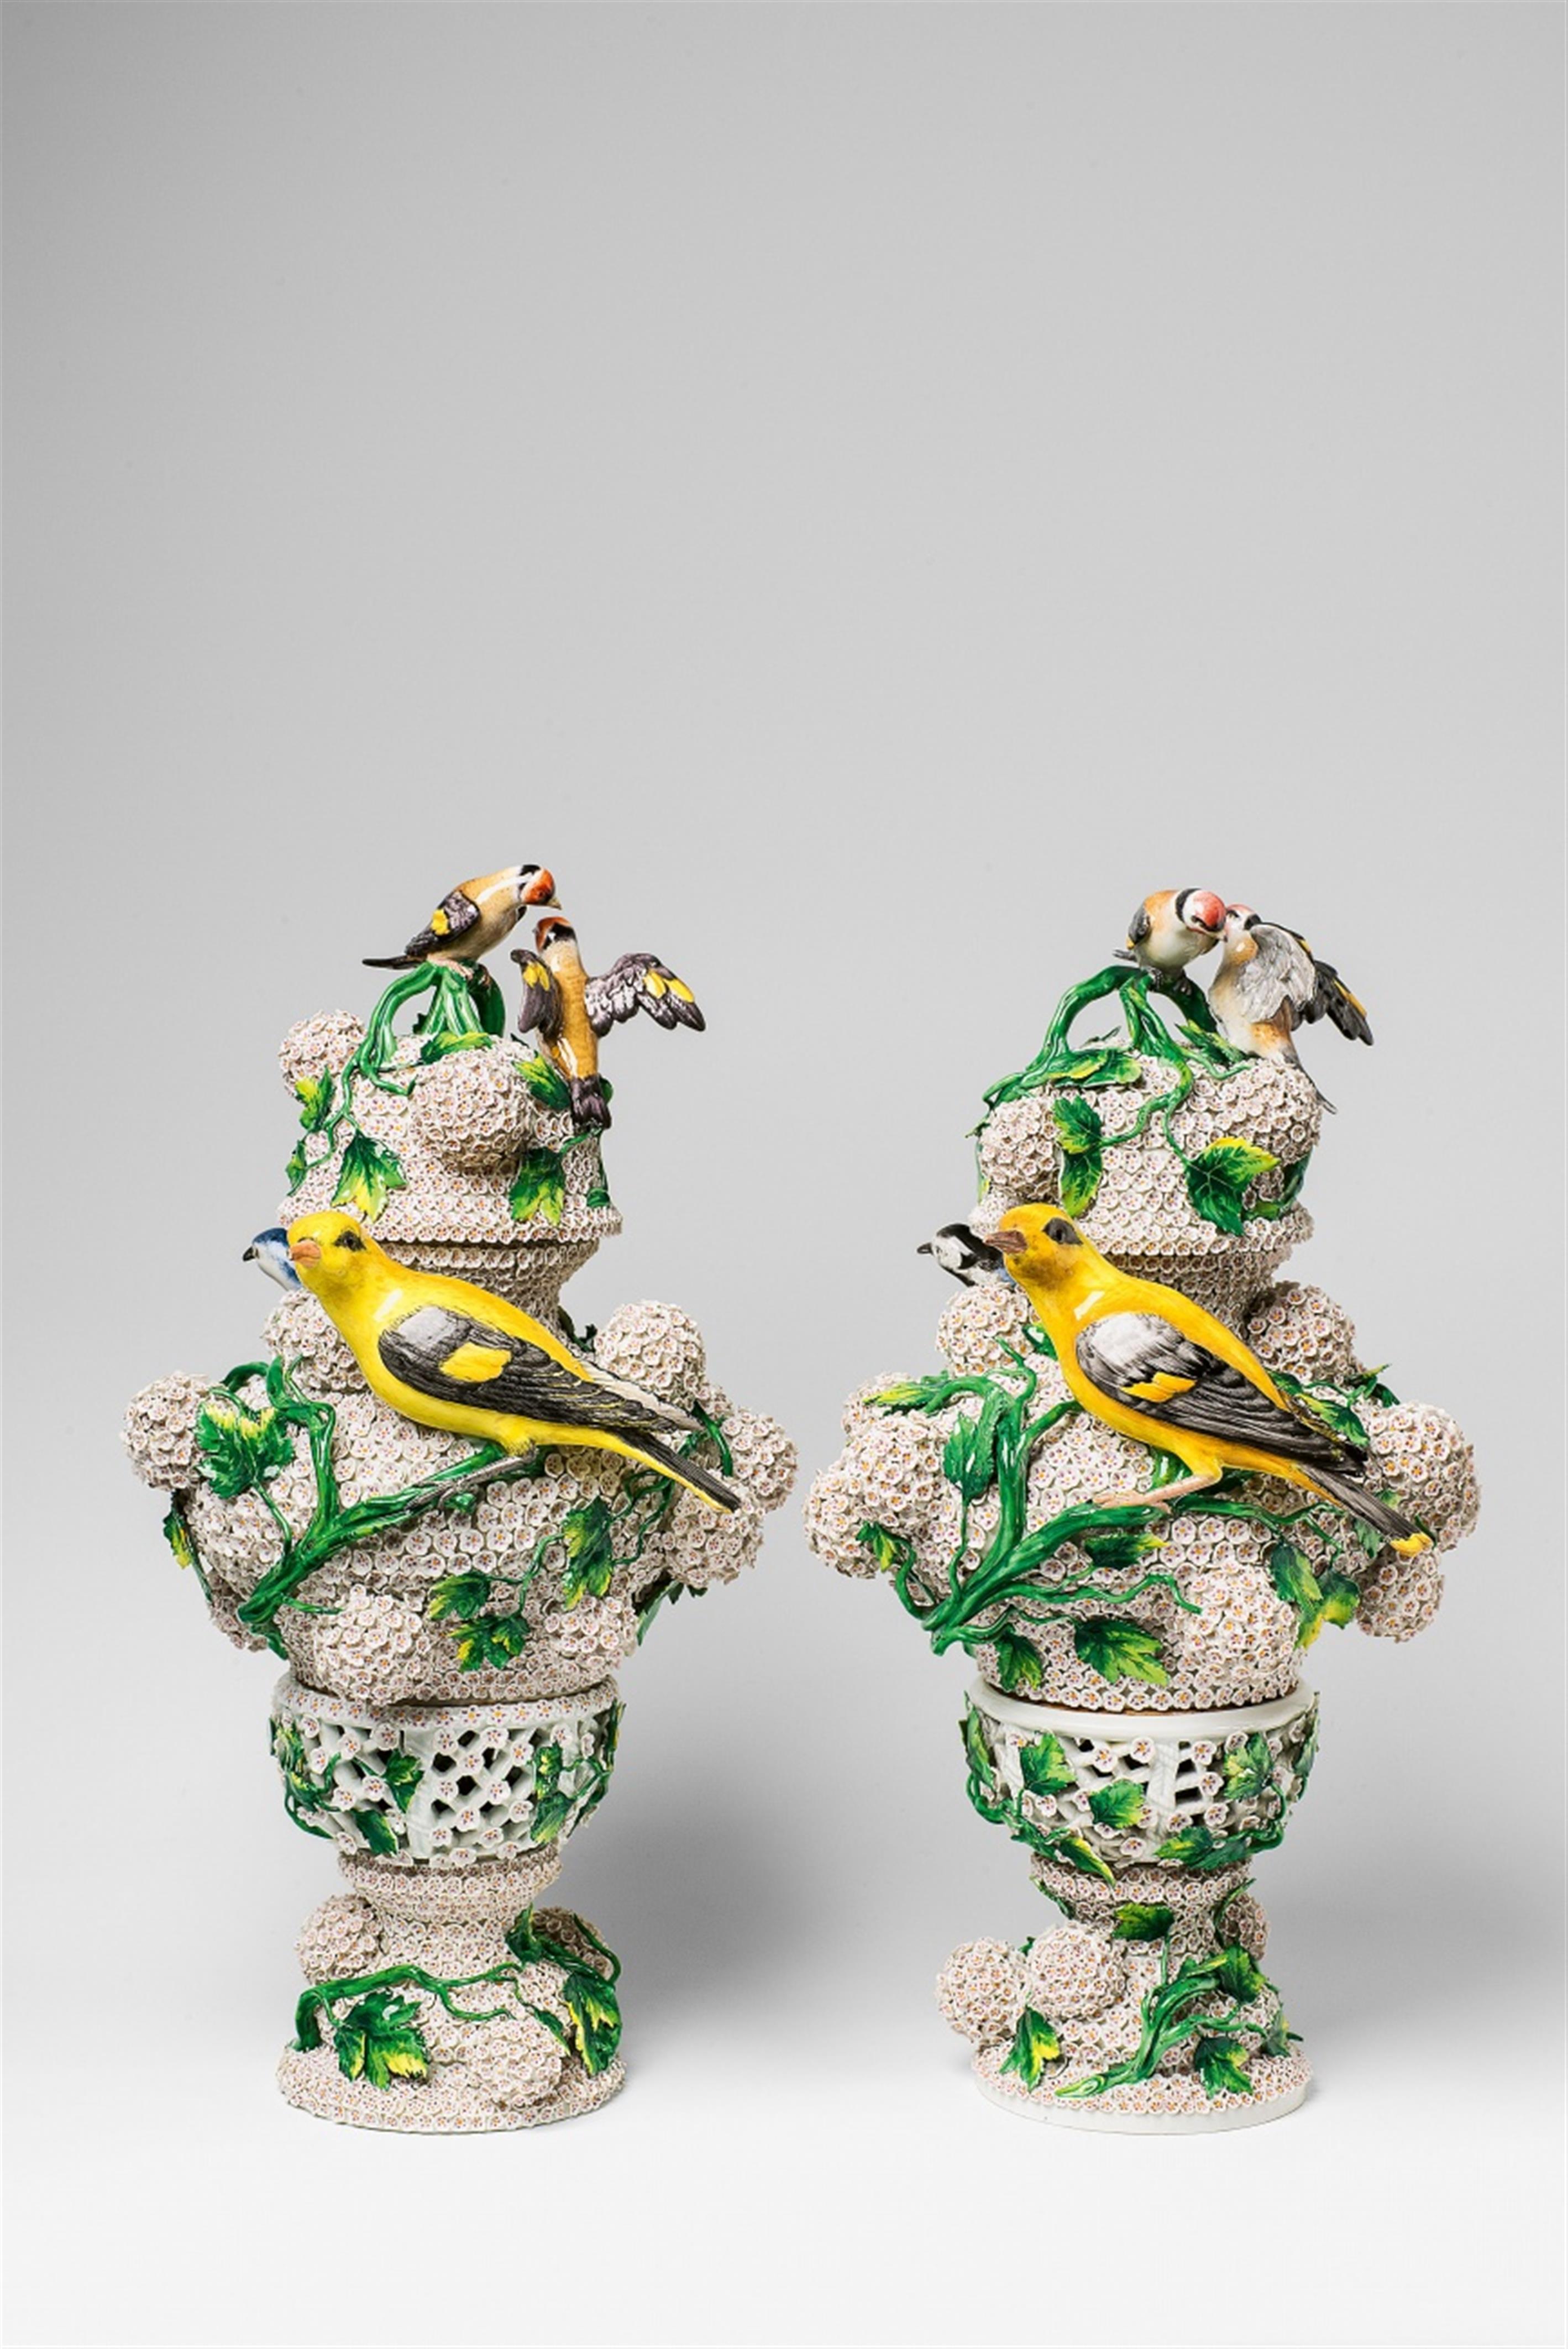 A pair of Meissen porcelain snowball flower vases with birds - image-1